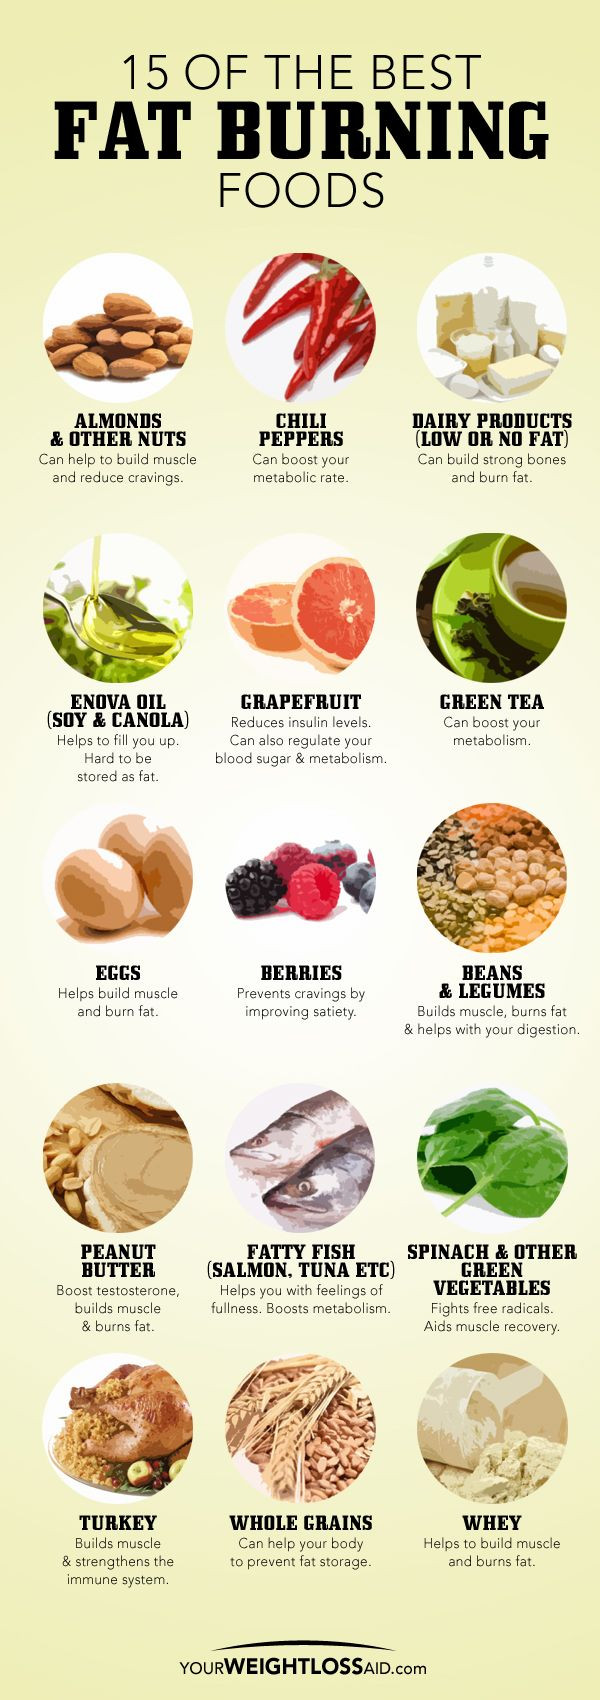 Best Stomach Fat Burning Foods
 15 Fat Burning Foods